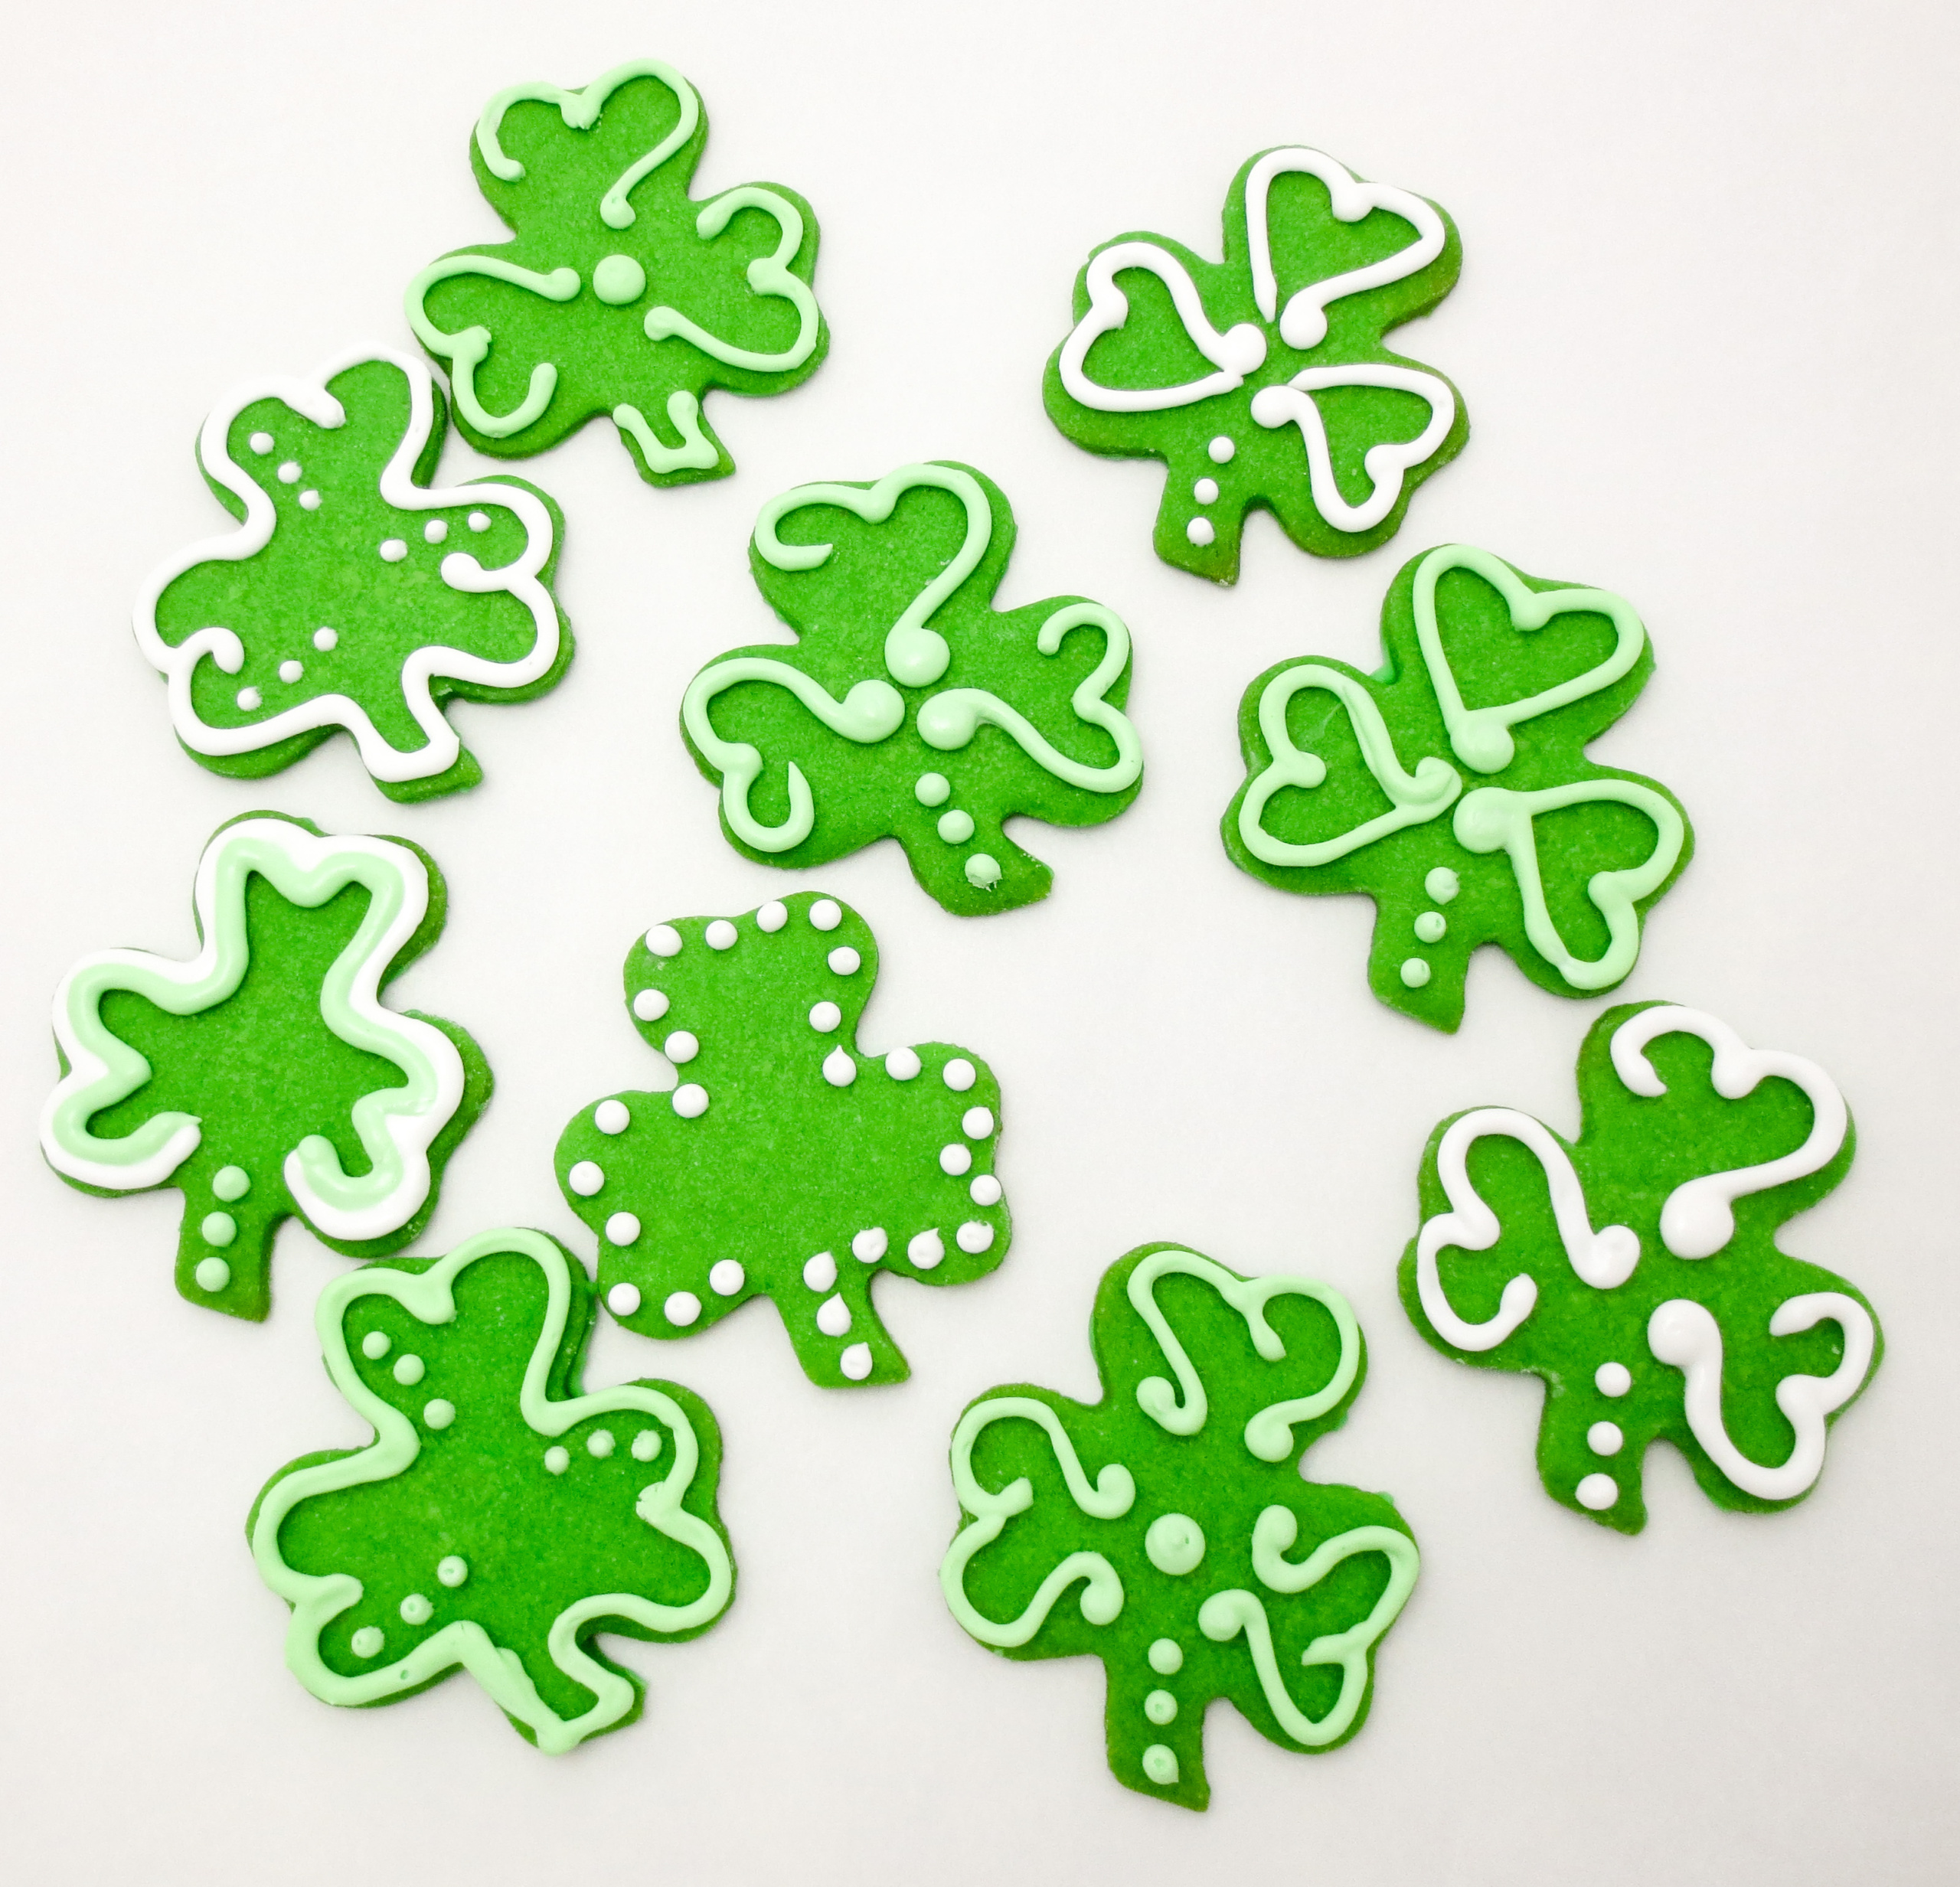 Shamrock cookies are mint-flavored sugar cookies decorated with royal icing (and/or sprinkles) in the quintessential St. Patrick’s Day shape. They are sure to bring a smile and good luck to everyone you share them with! Recipe developed by Cinnamon & Sugar for Deborah Garner, author of A FLAIR FOR SHAMROCKS. 